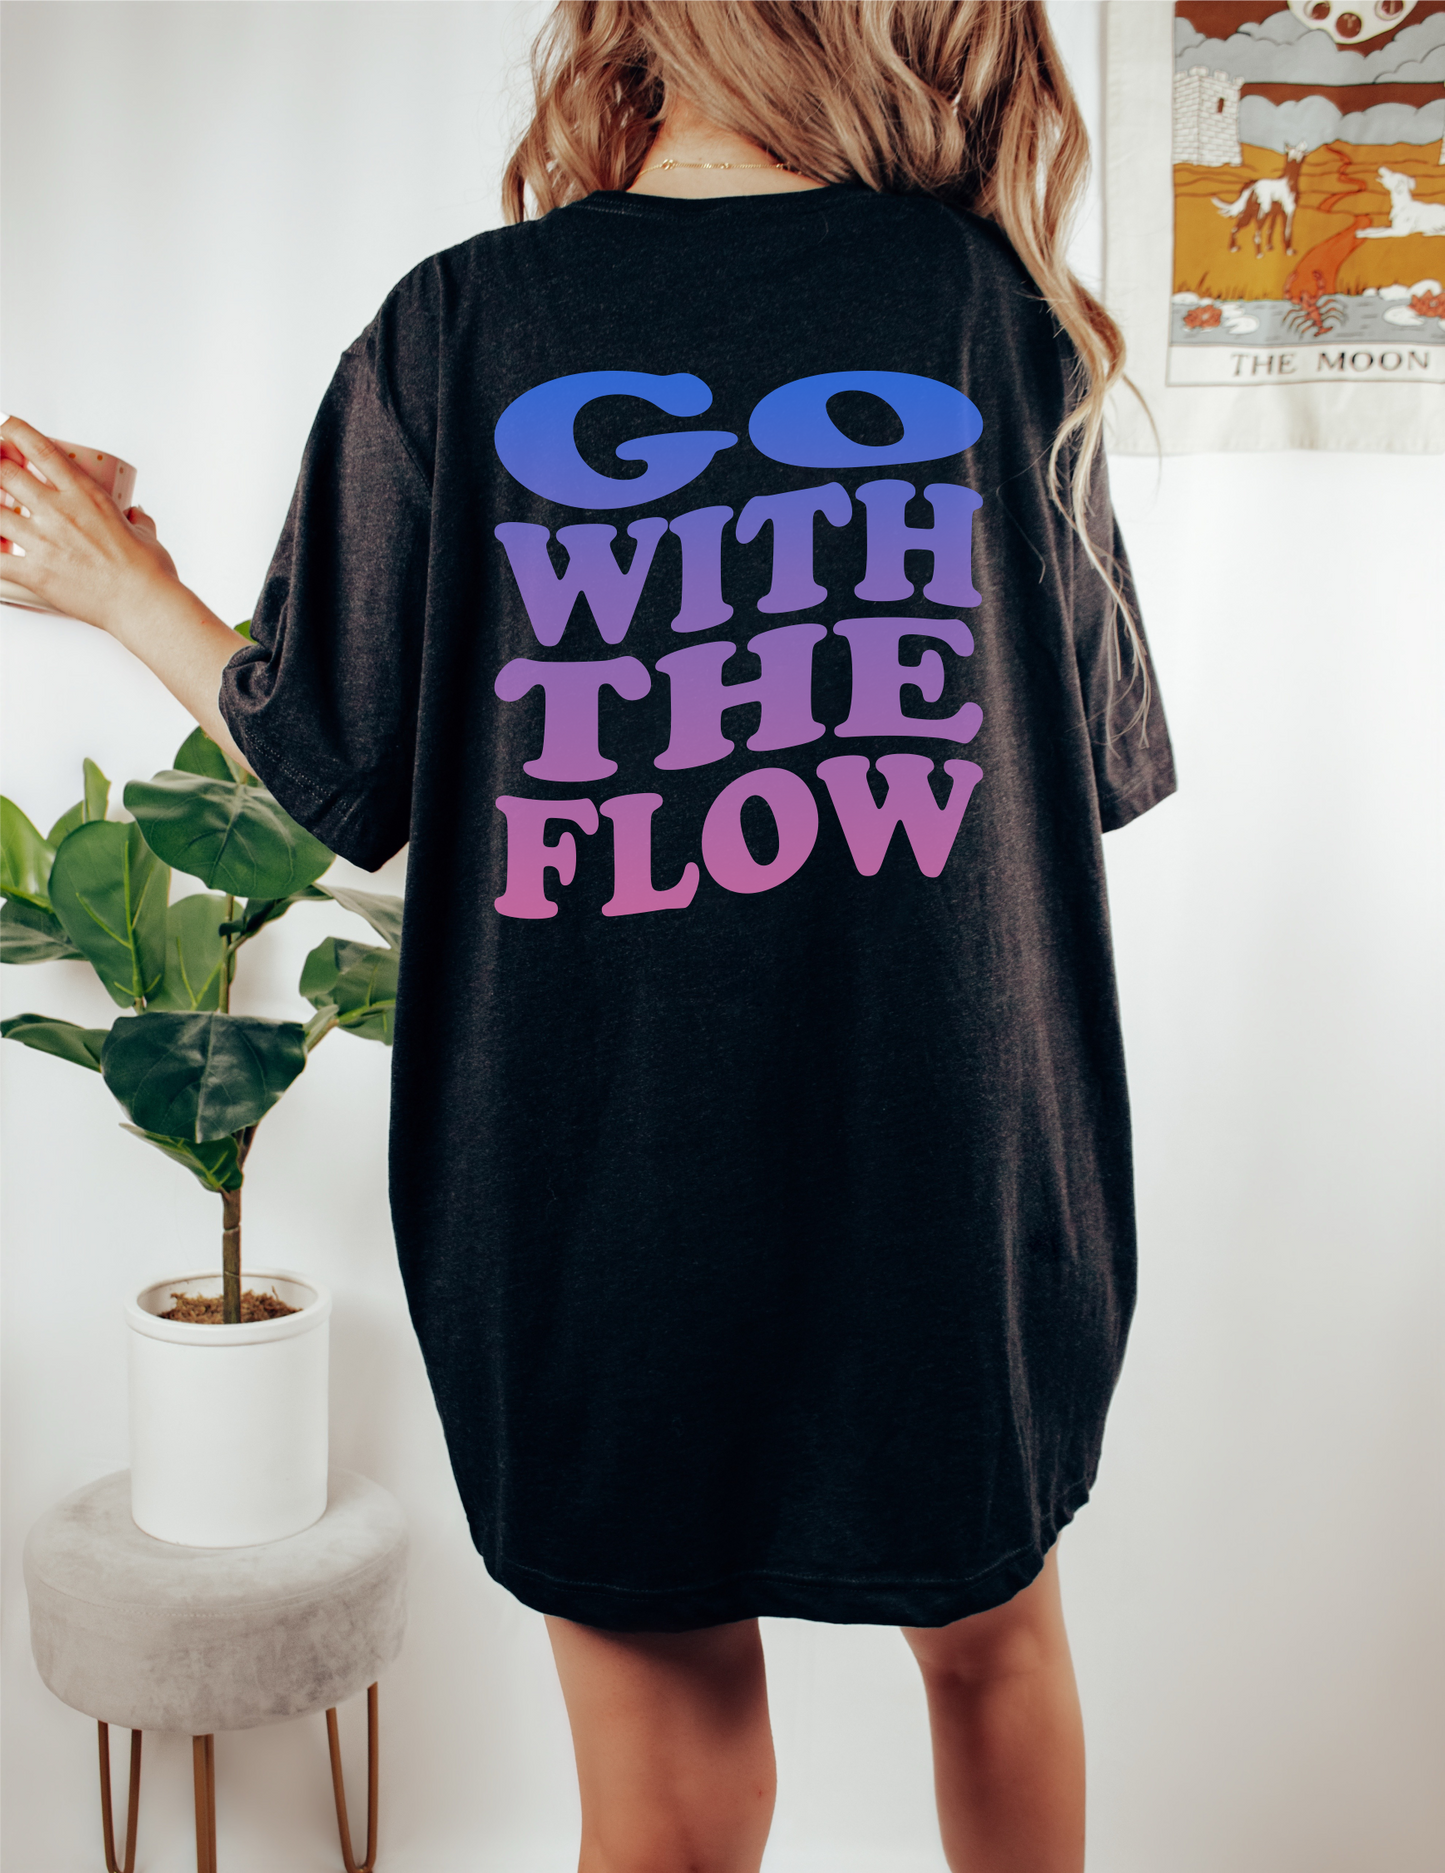 Go with the Flow T-shirt